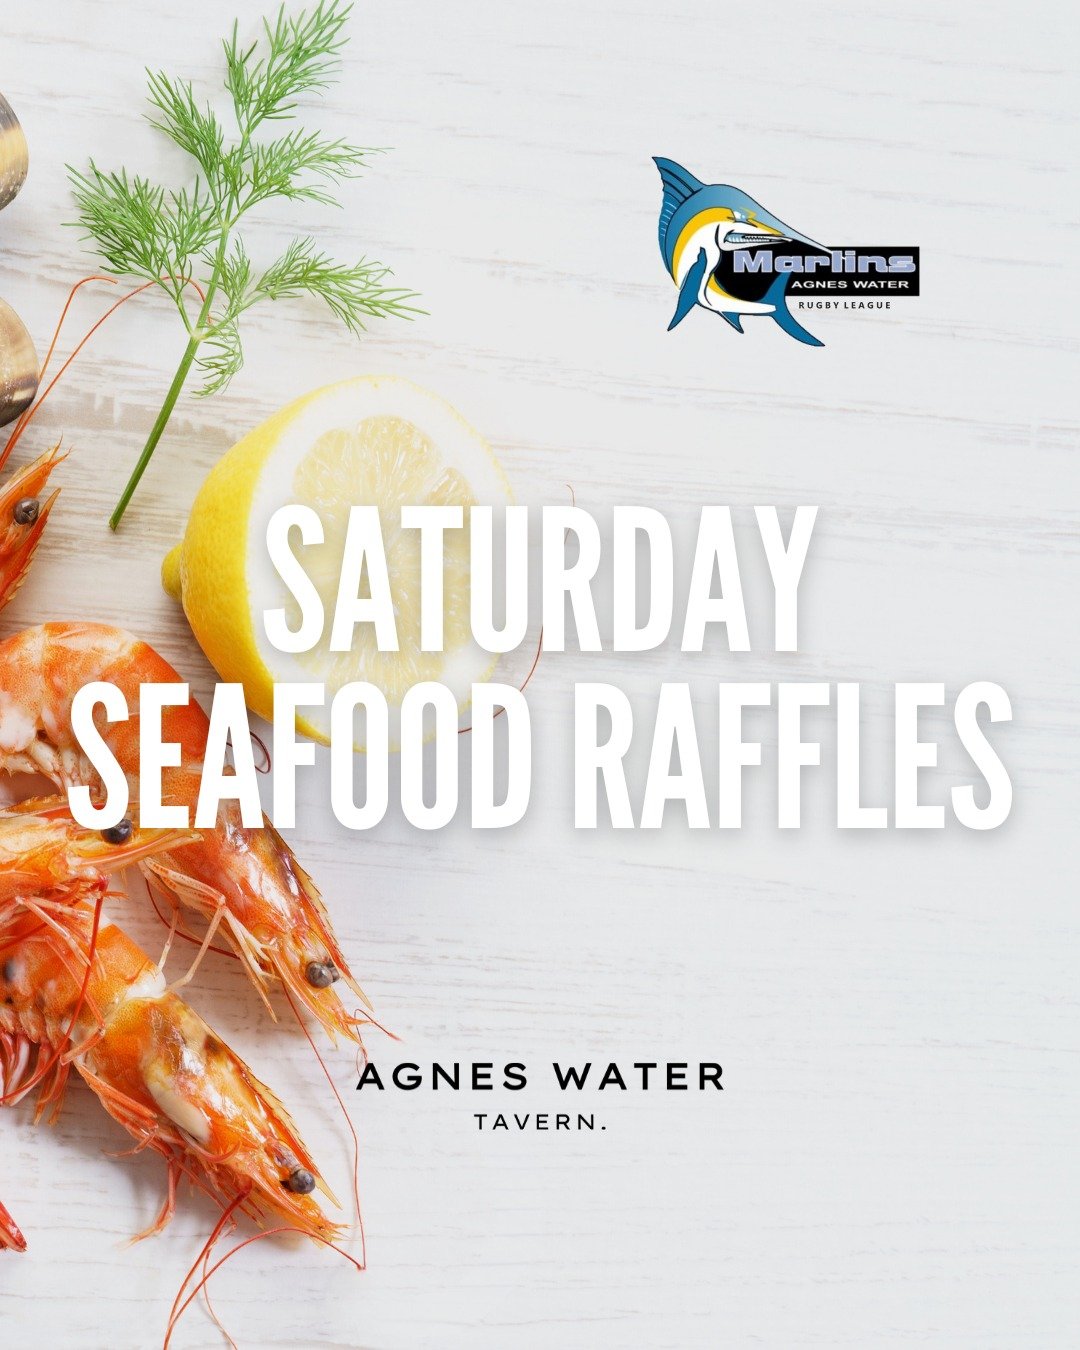 🐟🦐 𝗪𝗜𝗡 𝗮 𝗦𝗘𝗔𝗙𝗢𝗢𝗗 𝗣𝗟𝗔𝗧𝗧𝗘𝗥 𝗧𝗼𝗻𝗶𝗴𝗵𝘁

Join us every Saturday for a chance to win mouthwatering seafood platters in our exciting raffles, supporting the Marlins - Agnes Water Rugby League Club 

⏰ 𝗦𝘁𝗮𝗿𝘁𝘀 𝟰𝗽𝗺 🎣

🍽️ 𝗥?